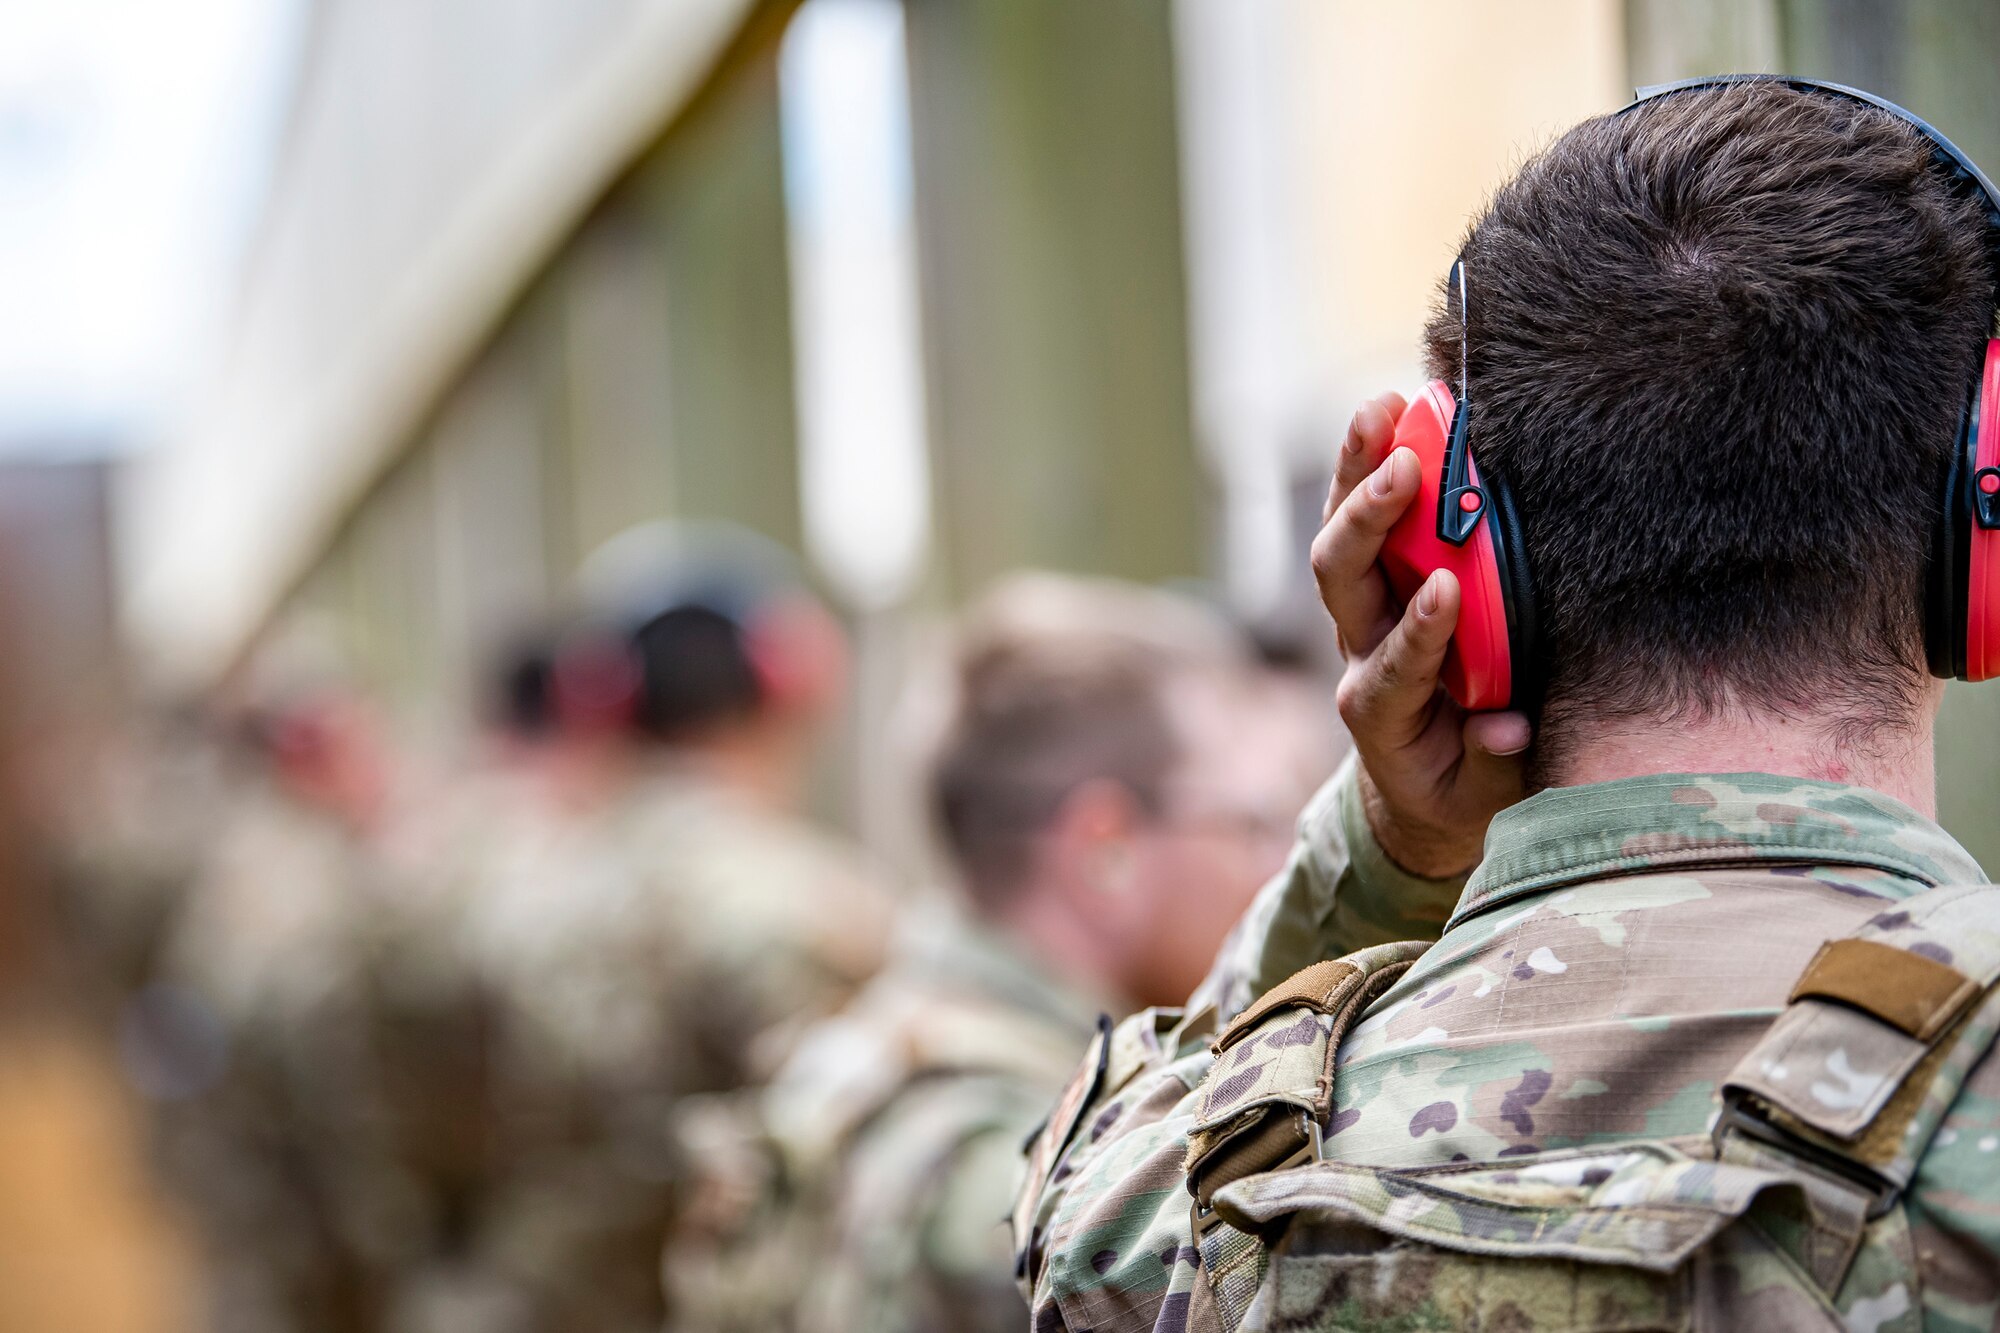 An Airman from the 423d Security Forces Squadron adjusts his ear protection during a proficiency course at RAF Molesworth, England, Aug. 19, 2022. During the course instructors from the 820th Base Defense Group and 435th Contingency Response Group provided oversight and guidance to help critique and advance the combat arms skills of the defenders from the 423d SFS. (U.S. Air Force photo by Staff Sgt. Eugene Oliver)